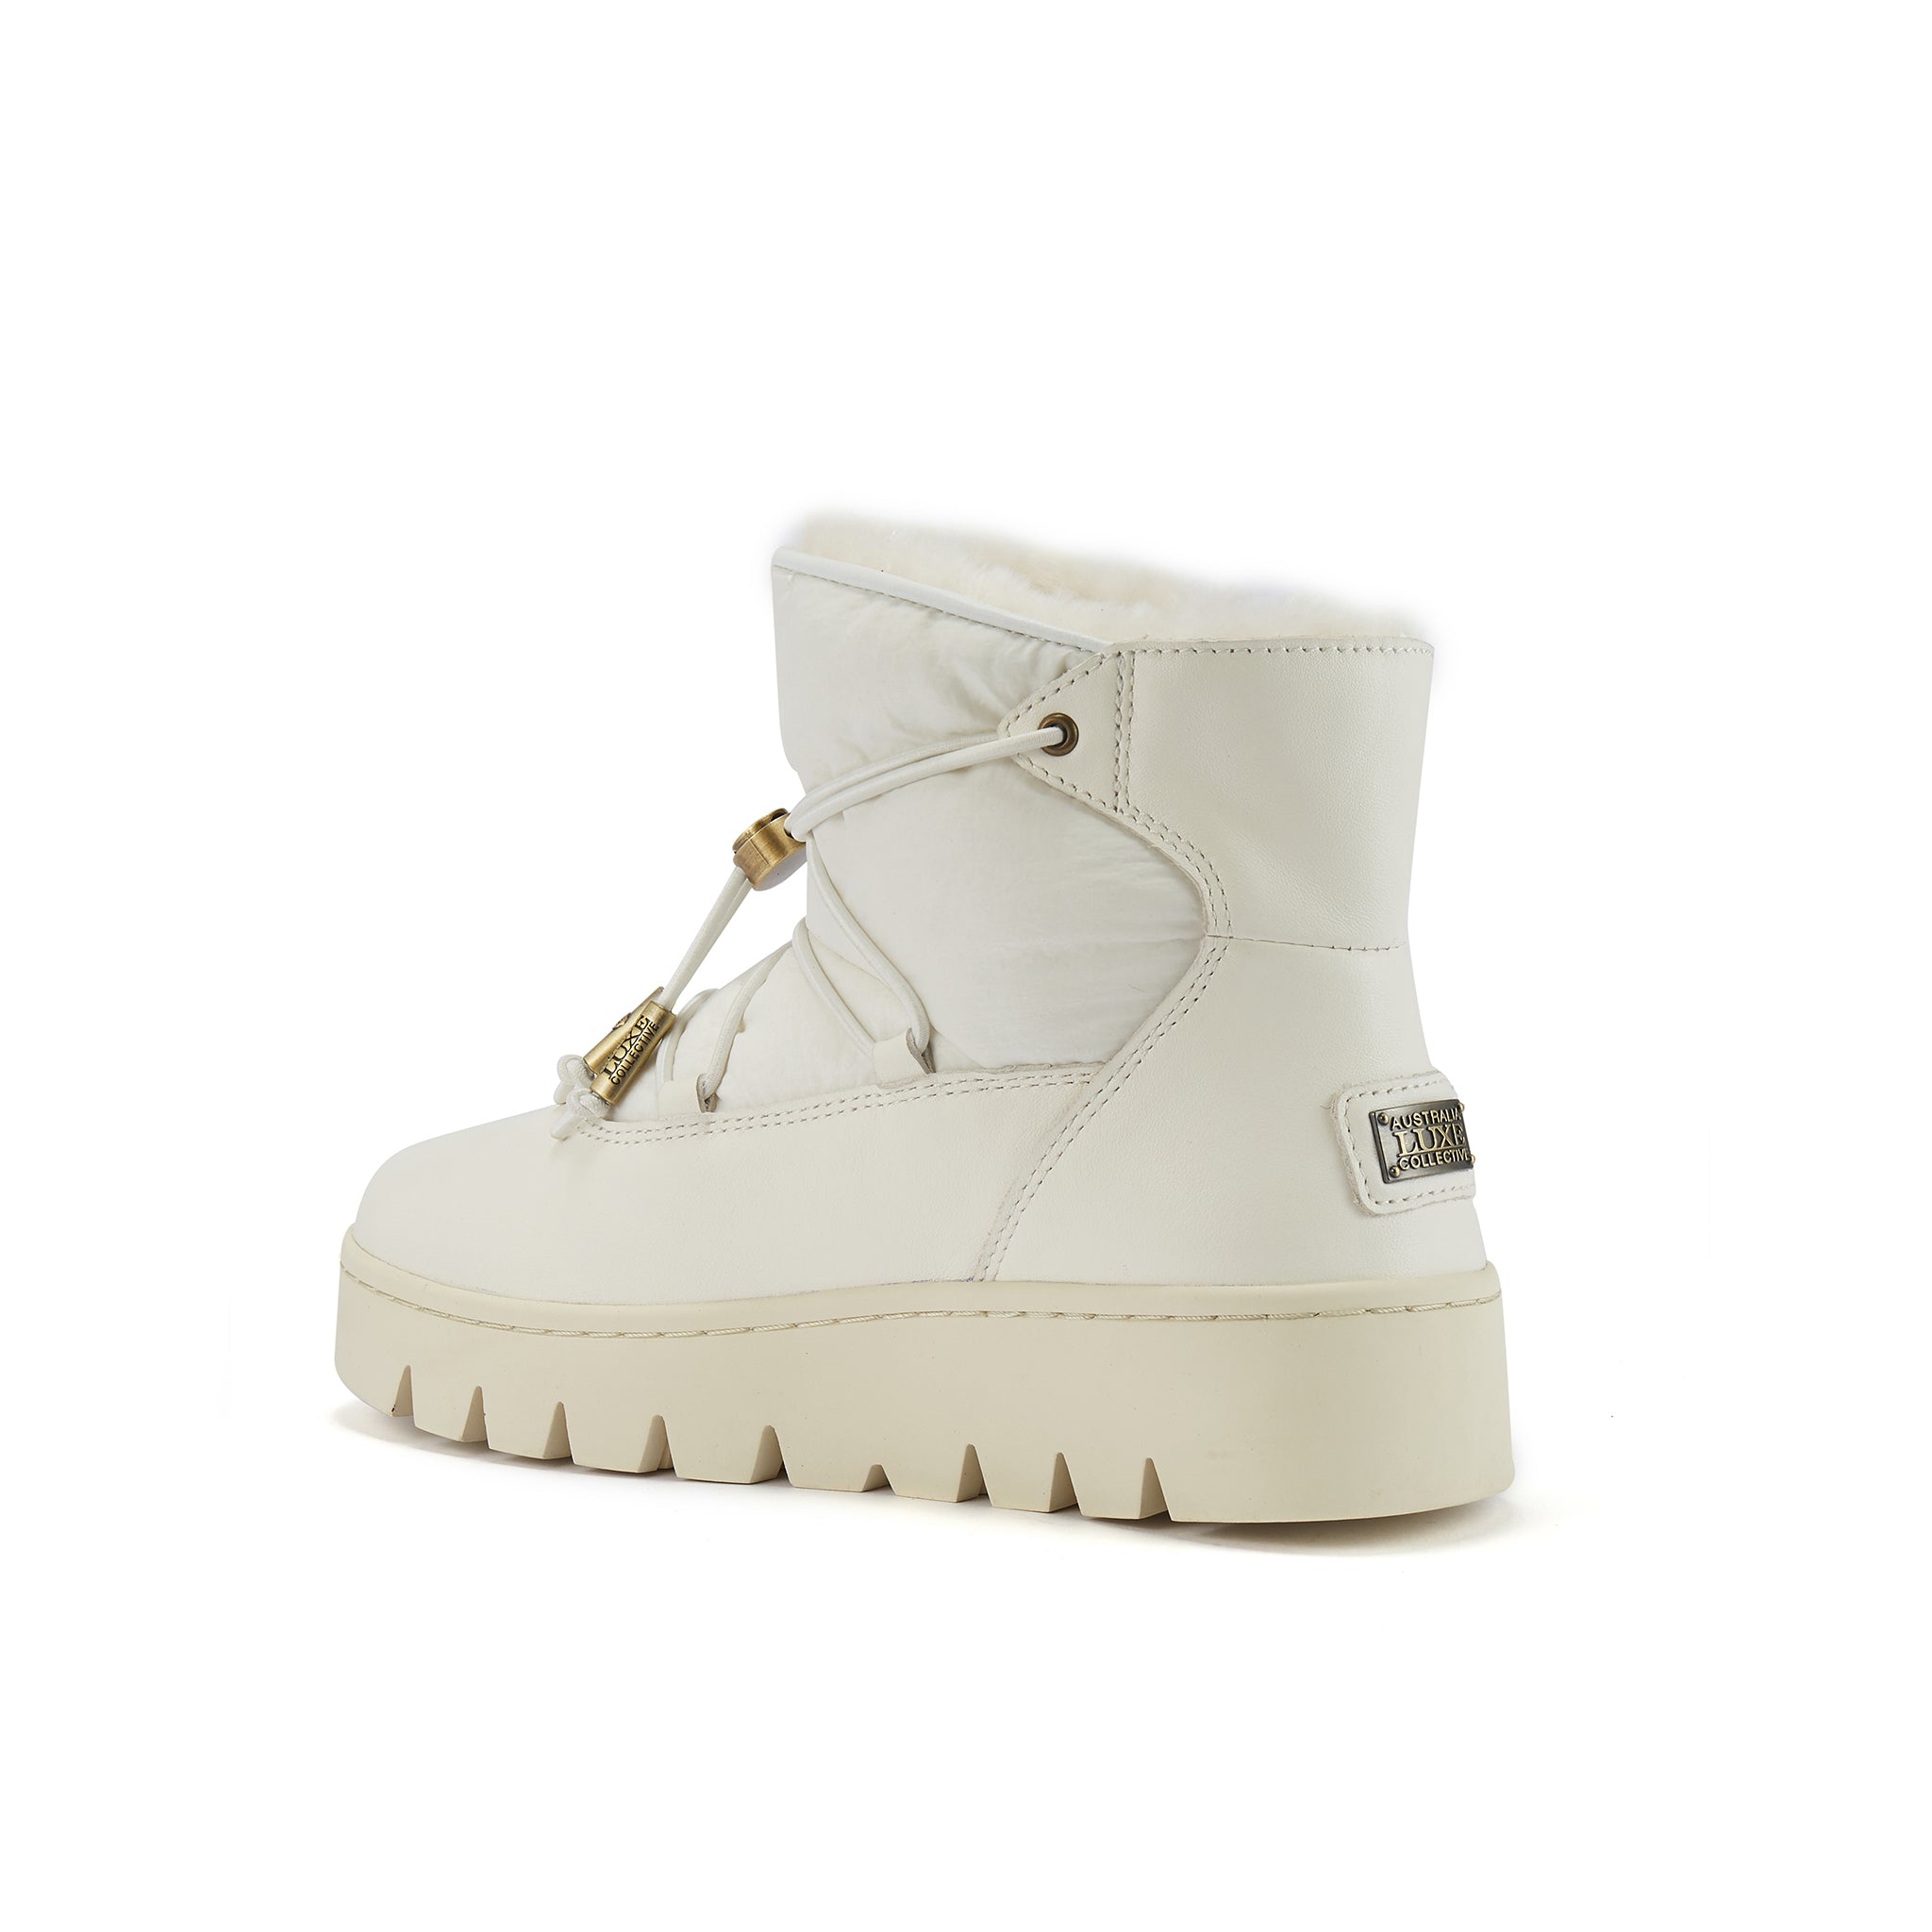 Adeline Pale Womens Boots